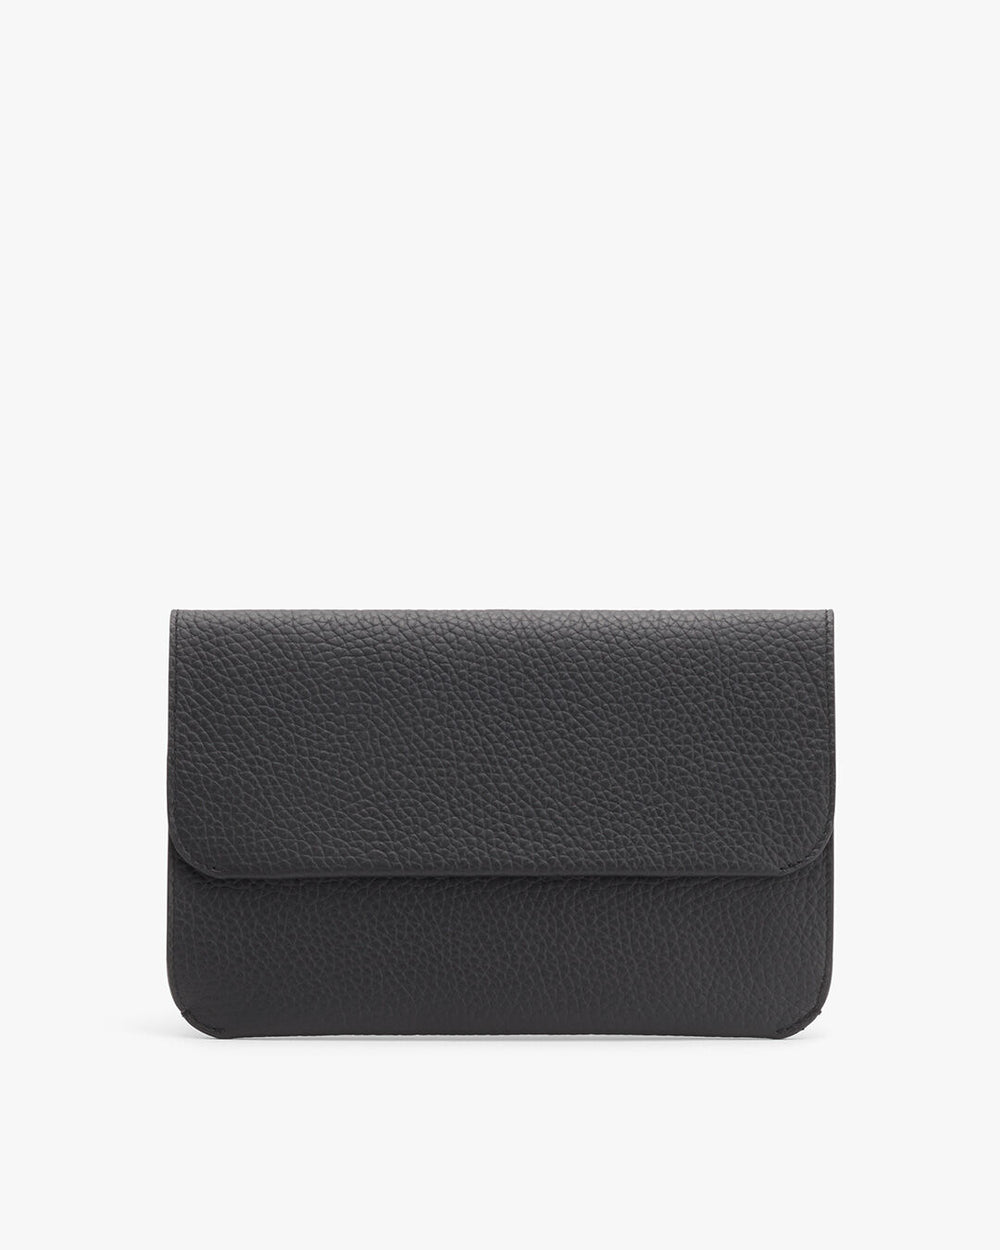 Textured clutch bag with flap closure on plain background